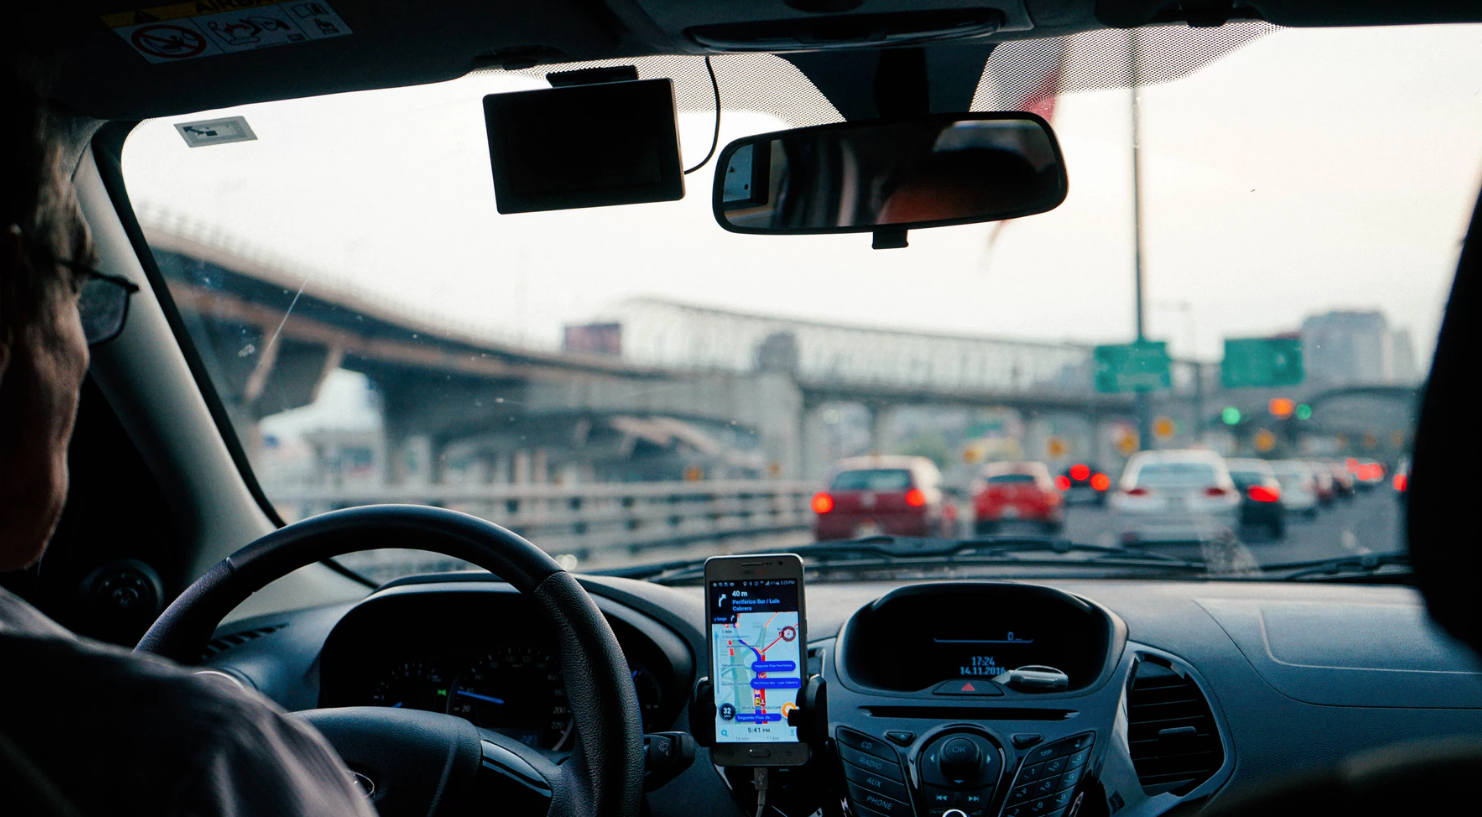 Overlooked Costs When Considering to Become a Ride Share Driver